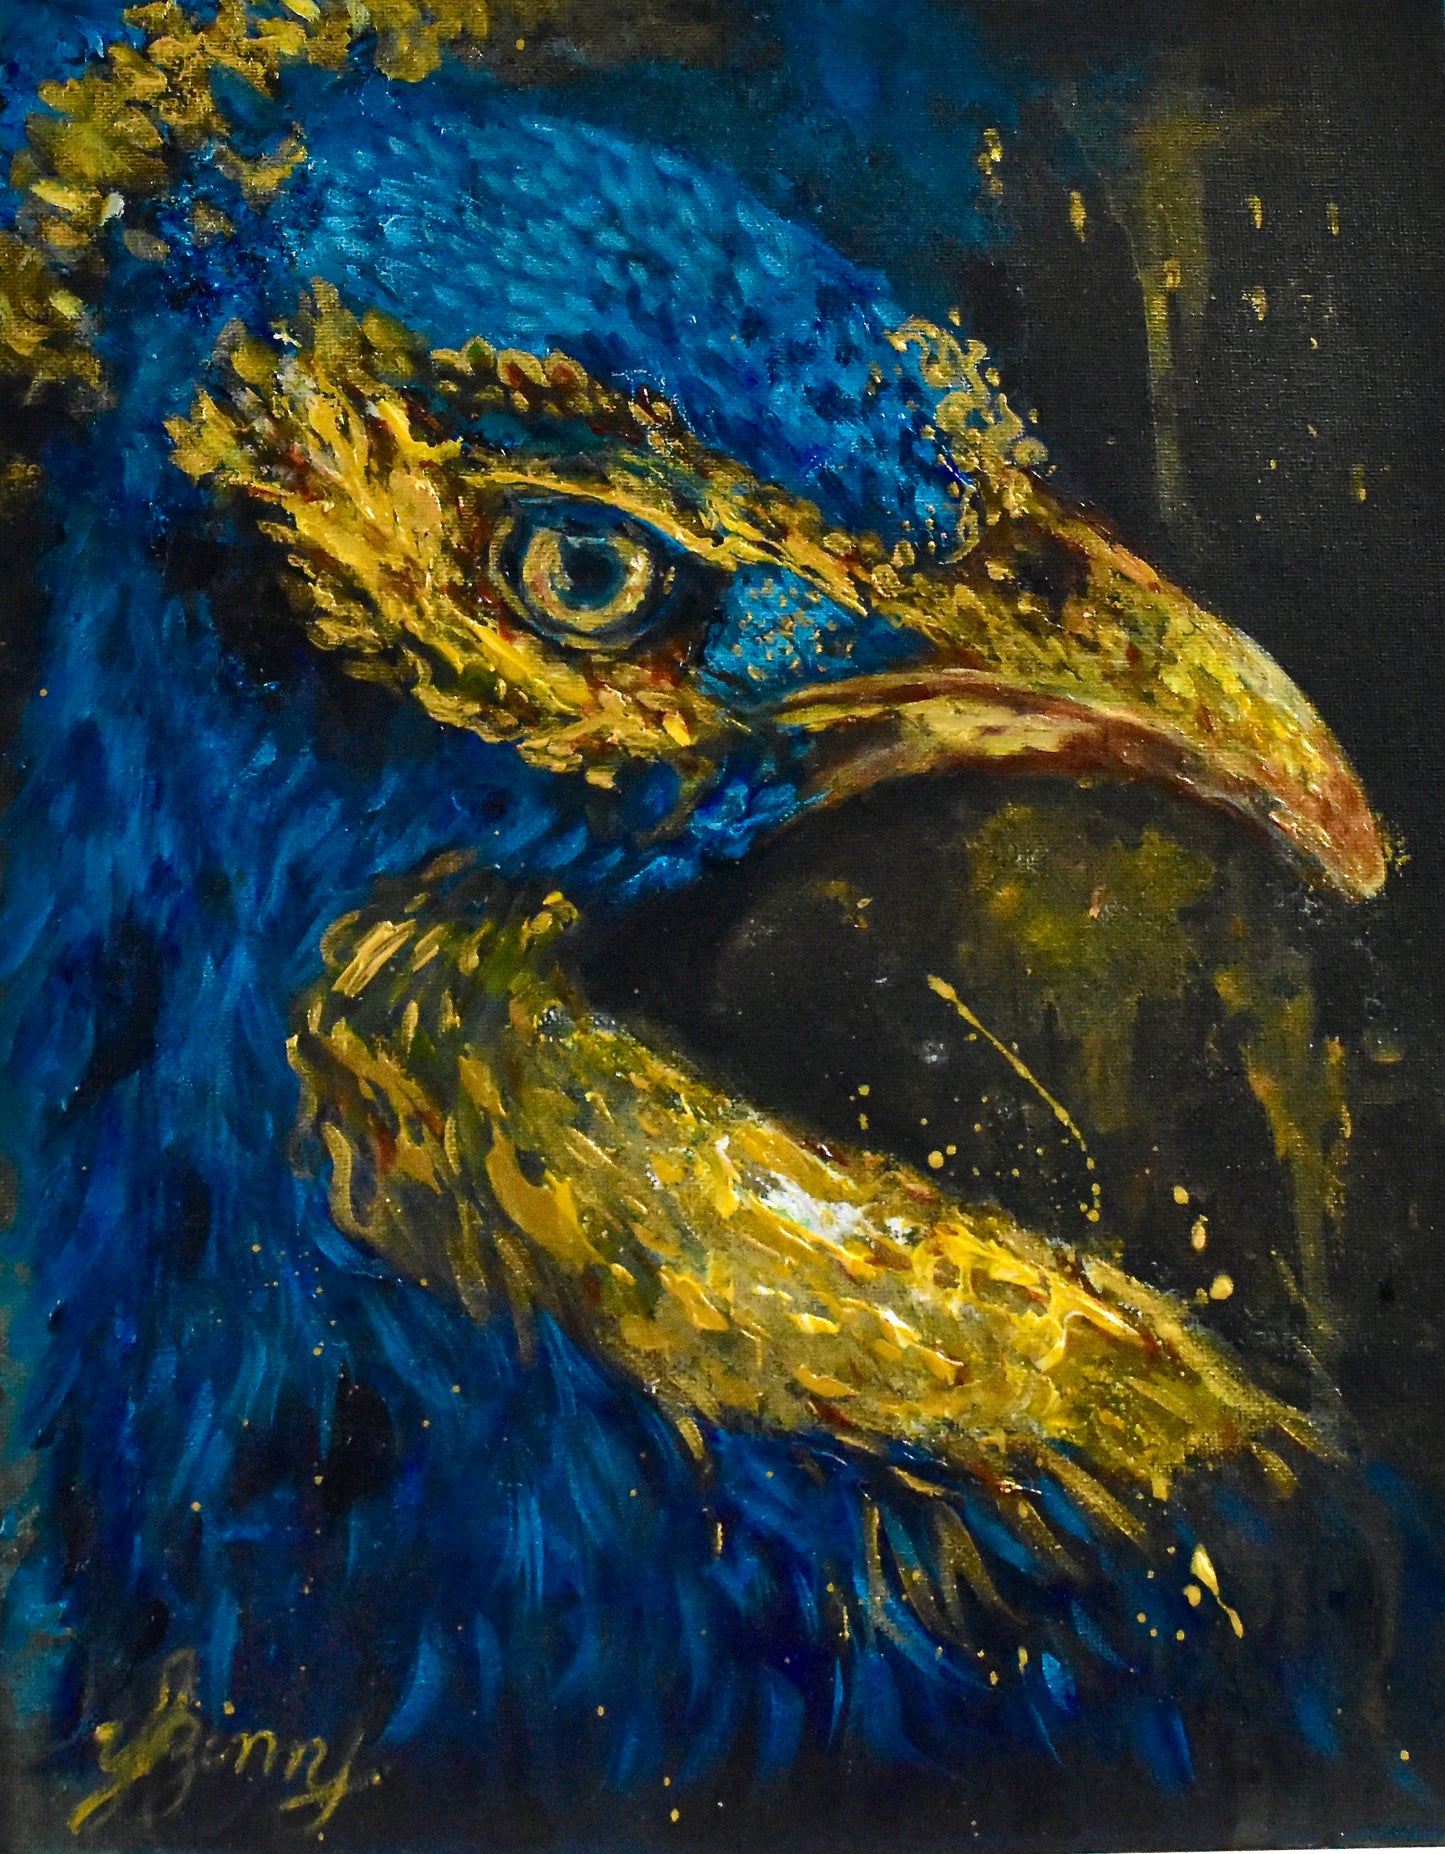 Golden - Blue Peacock By night ( Eagle) on Blue on Black